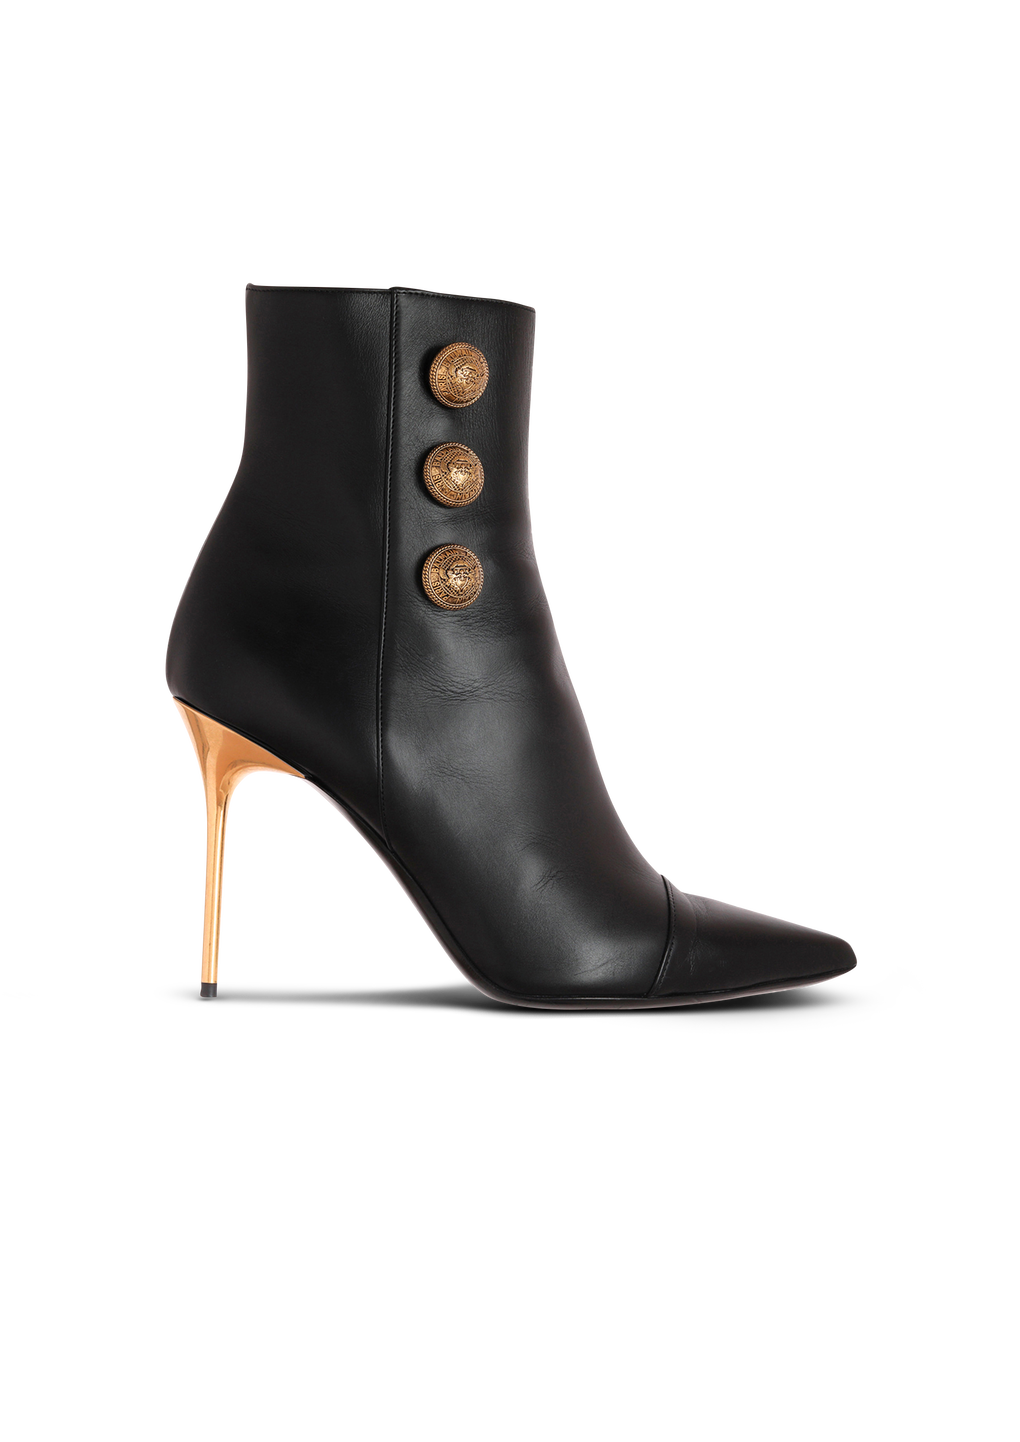 Leather Roni ankle boots, black, hi-res